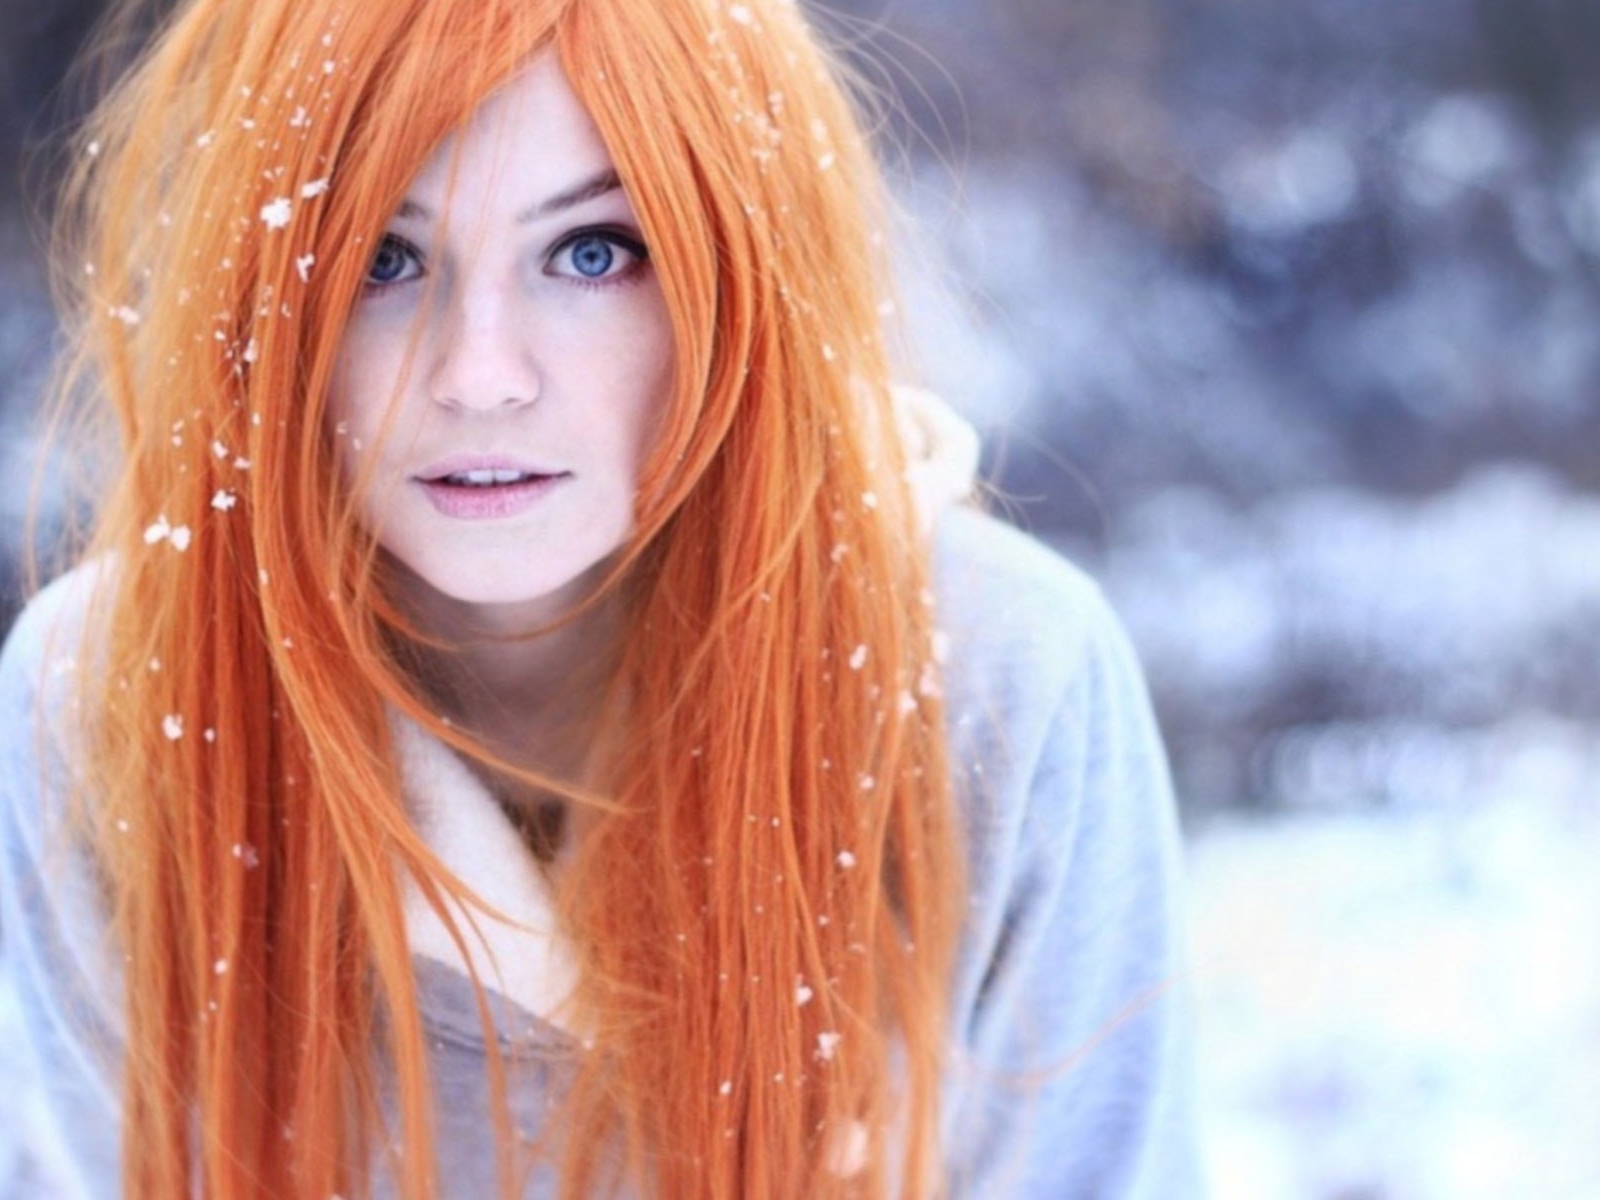 Summer Ginger Hair Girl And Snowflakes wallpaper 1600x1200